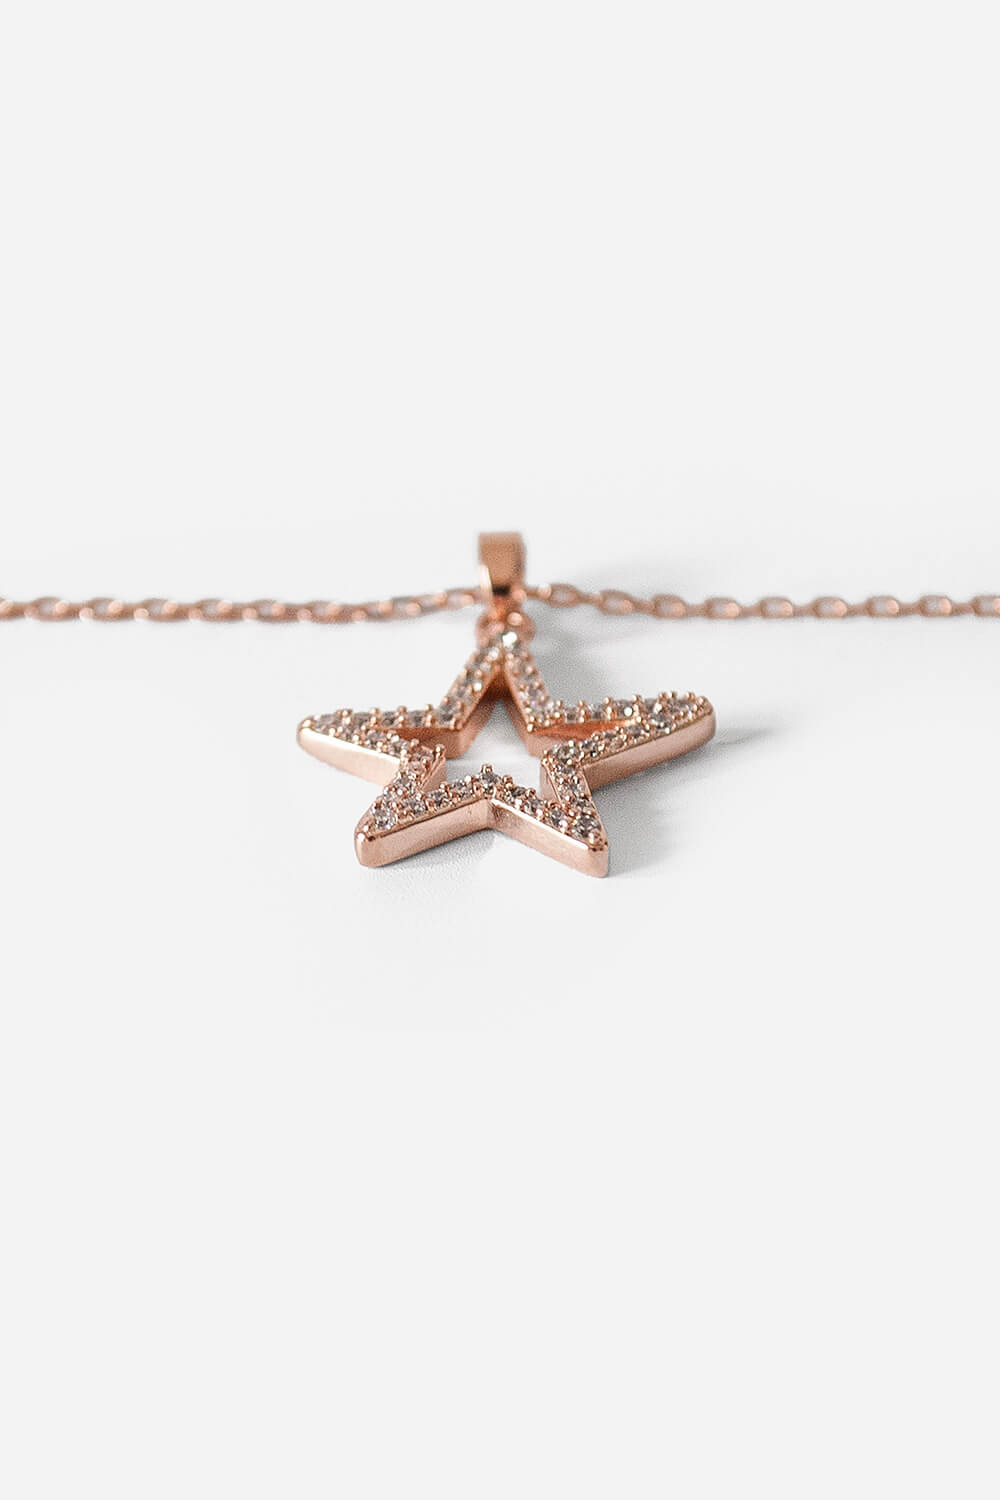 Rose Gold Cubuic Zirconia Star Necklace, Image 2 of 3